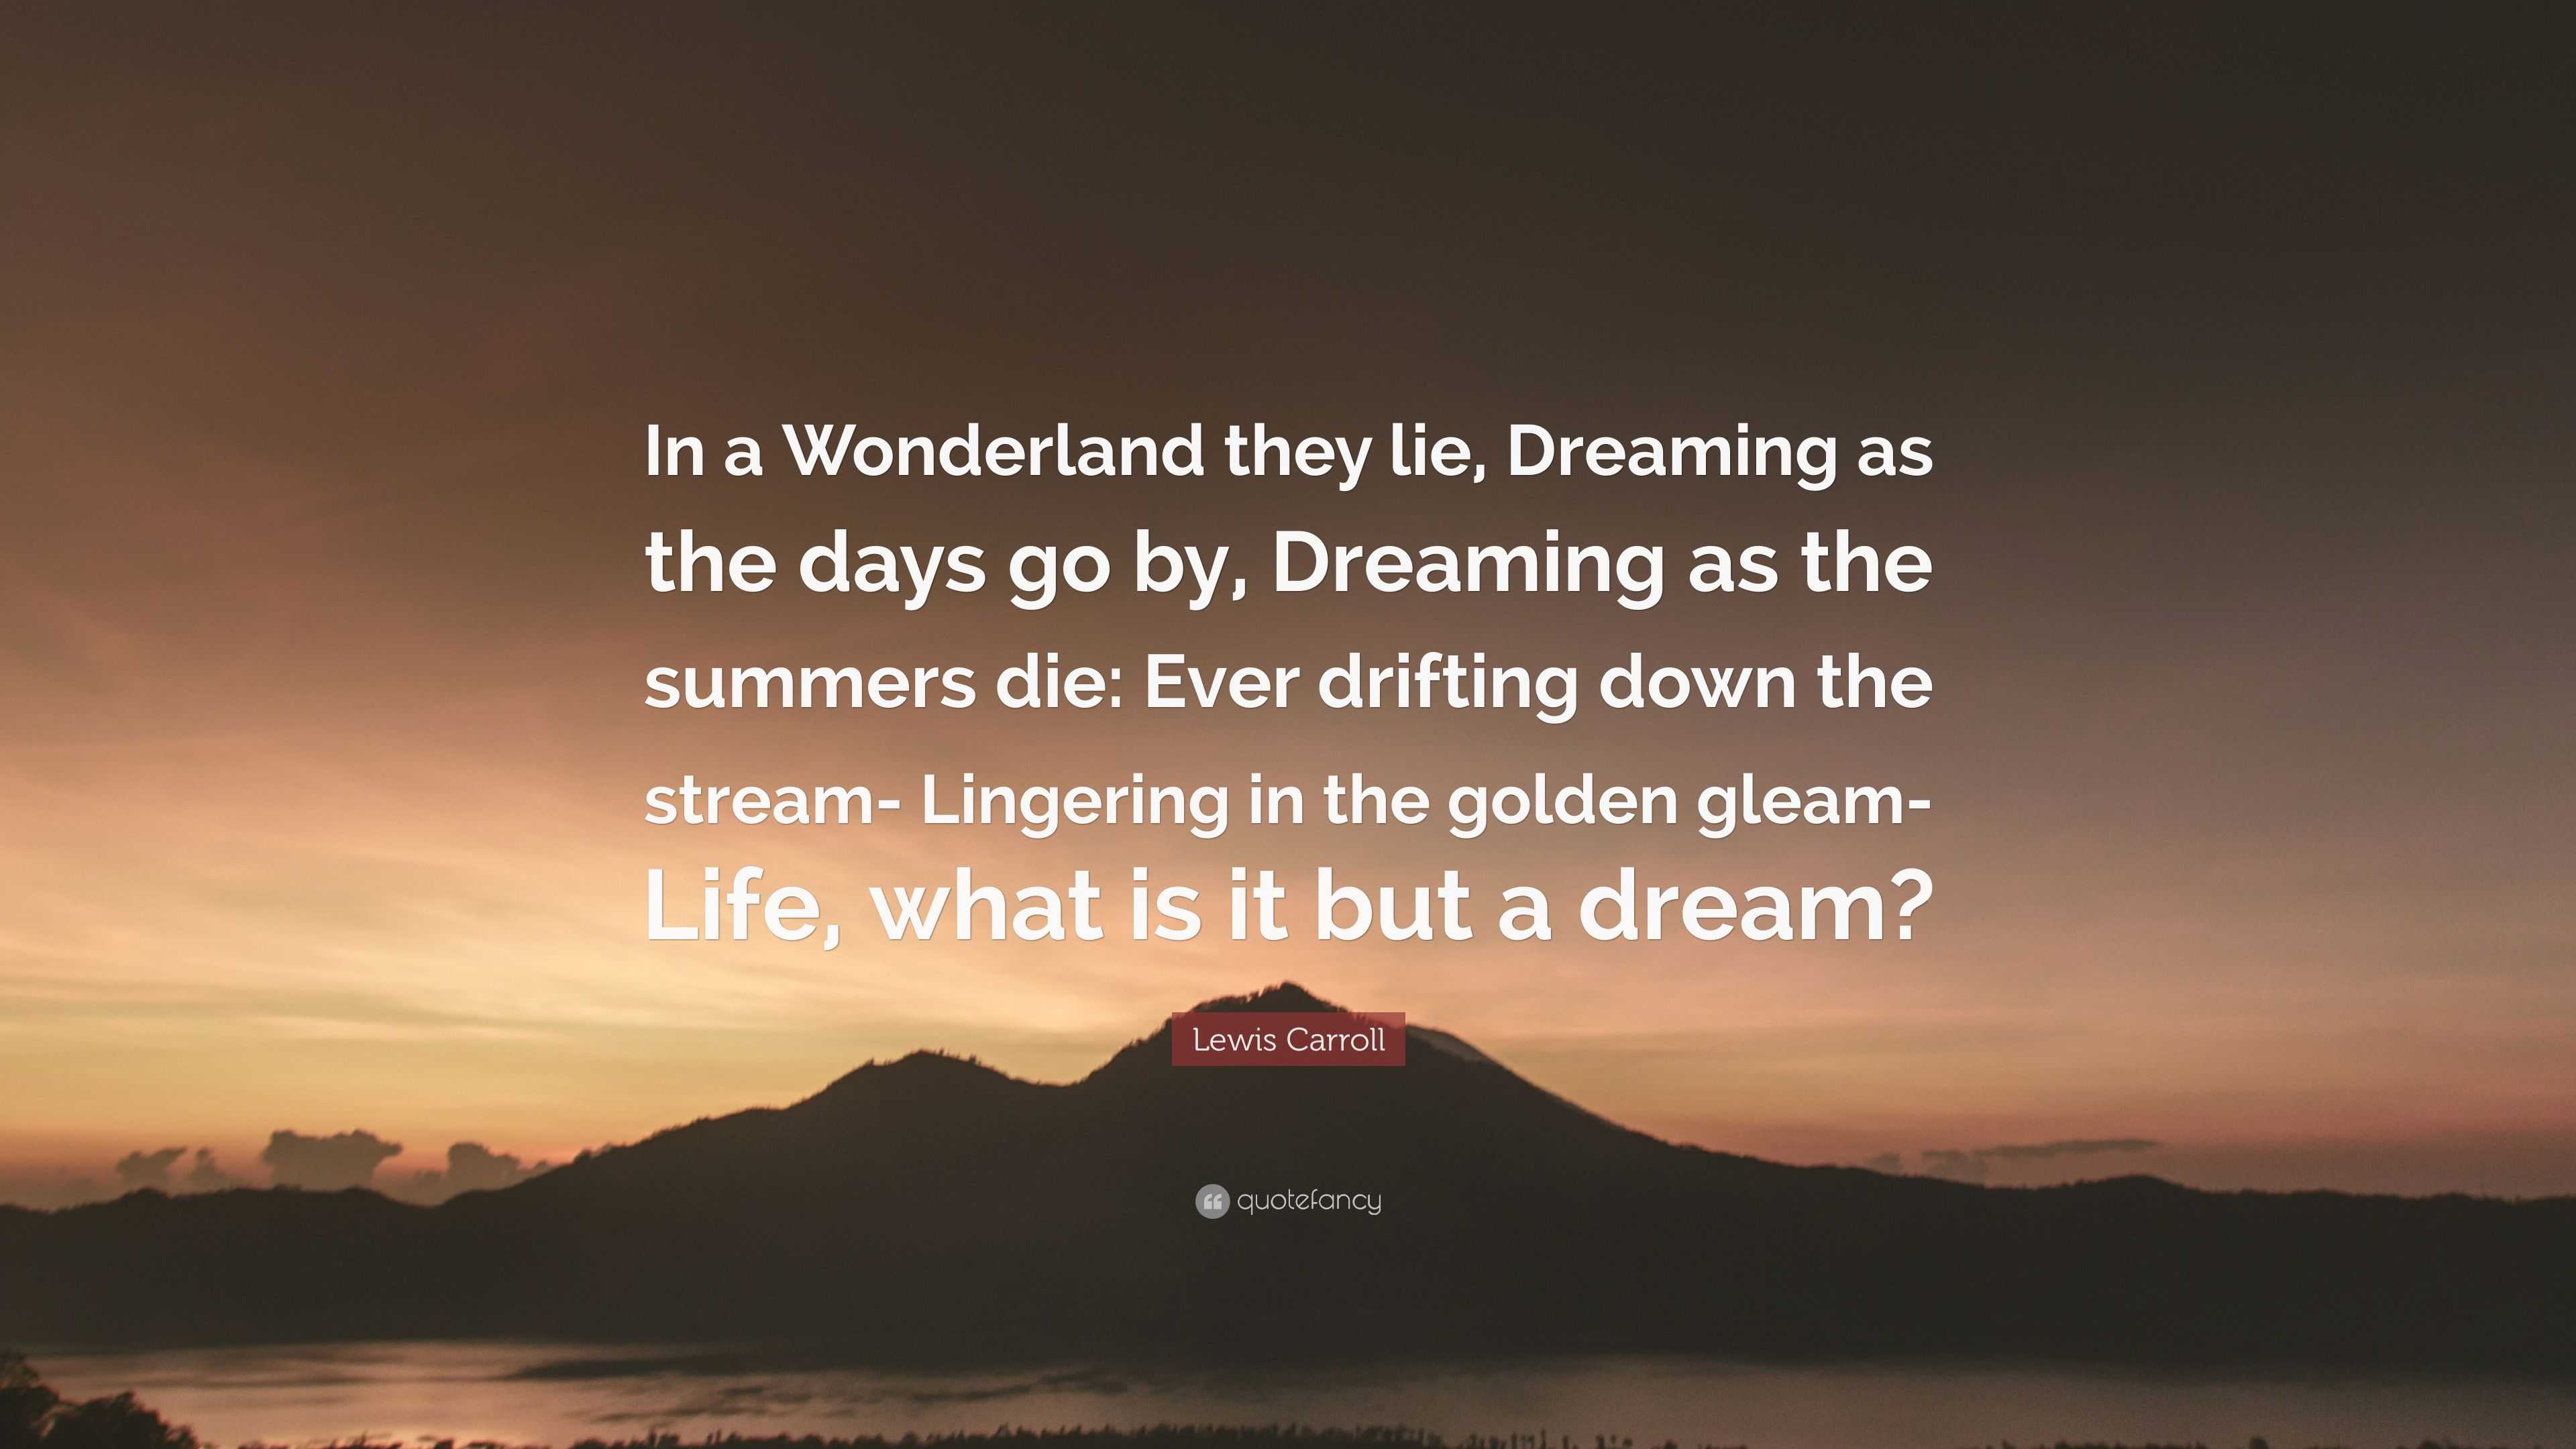 Lewis Carroll Quote: “In a Wonderland they lie, Dreaming as the days go ...